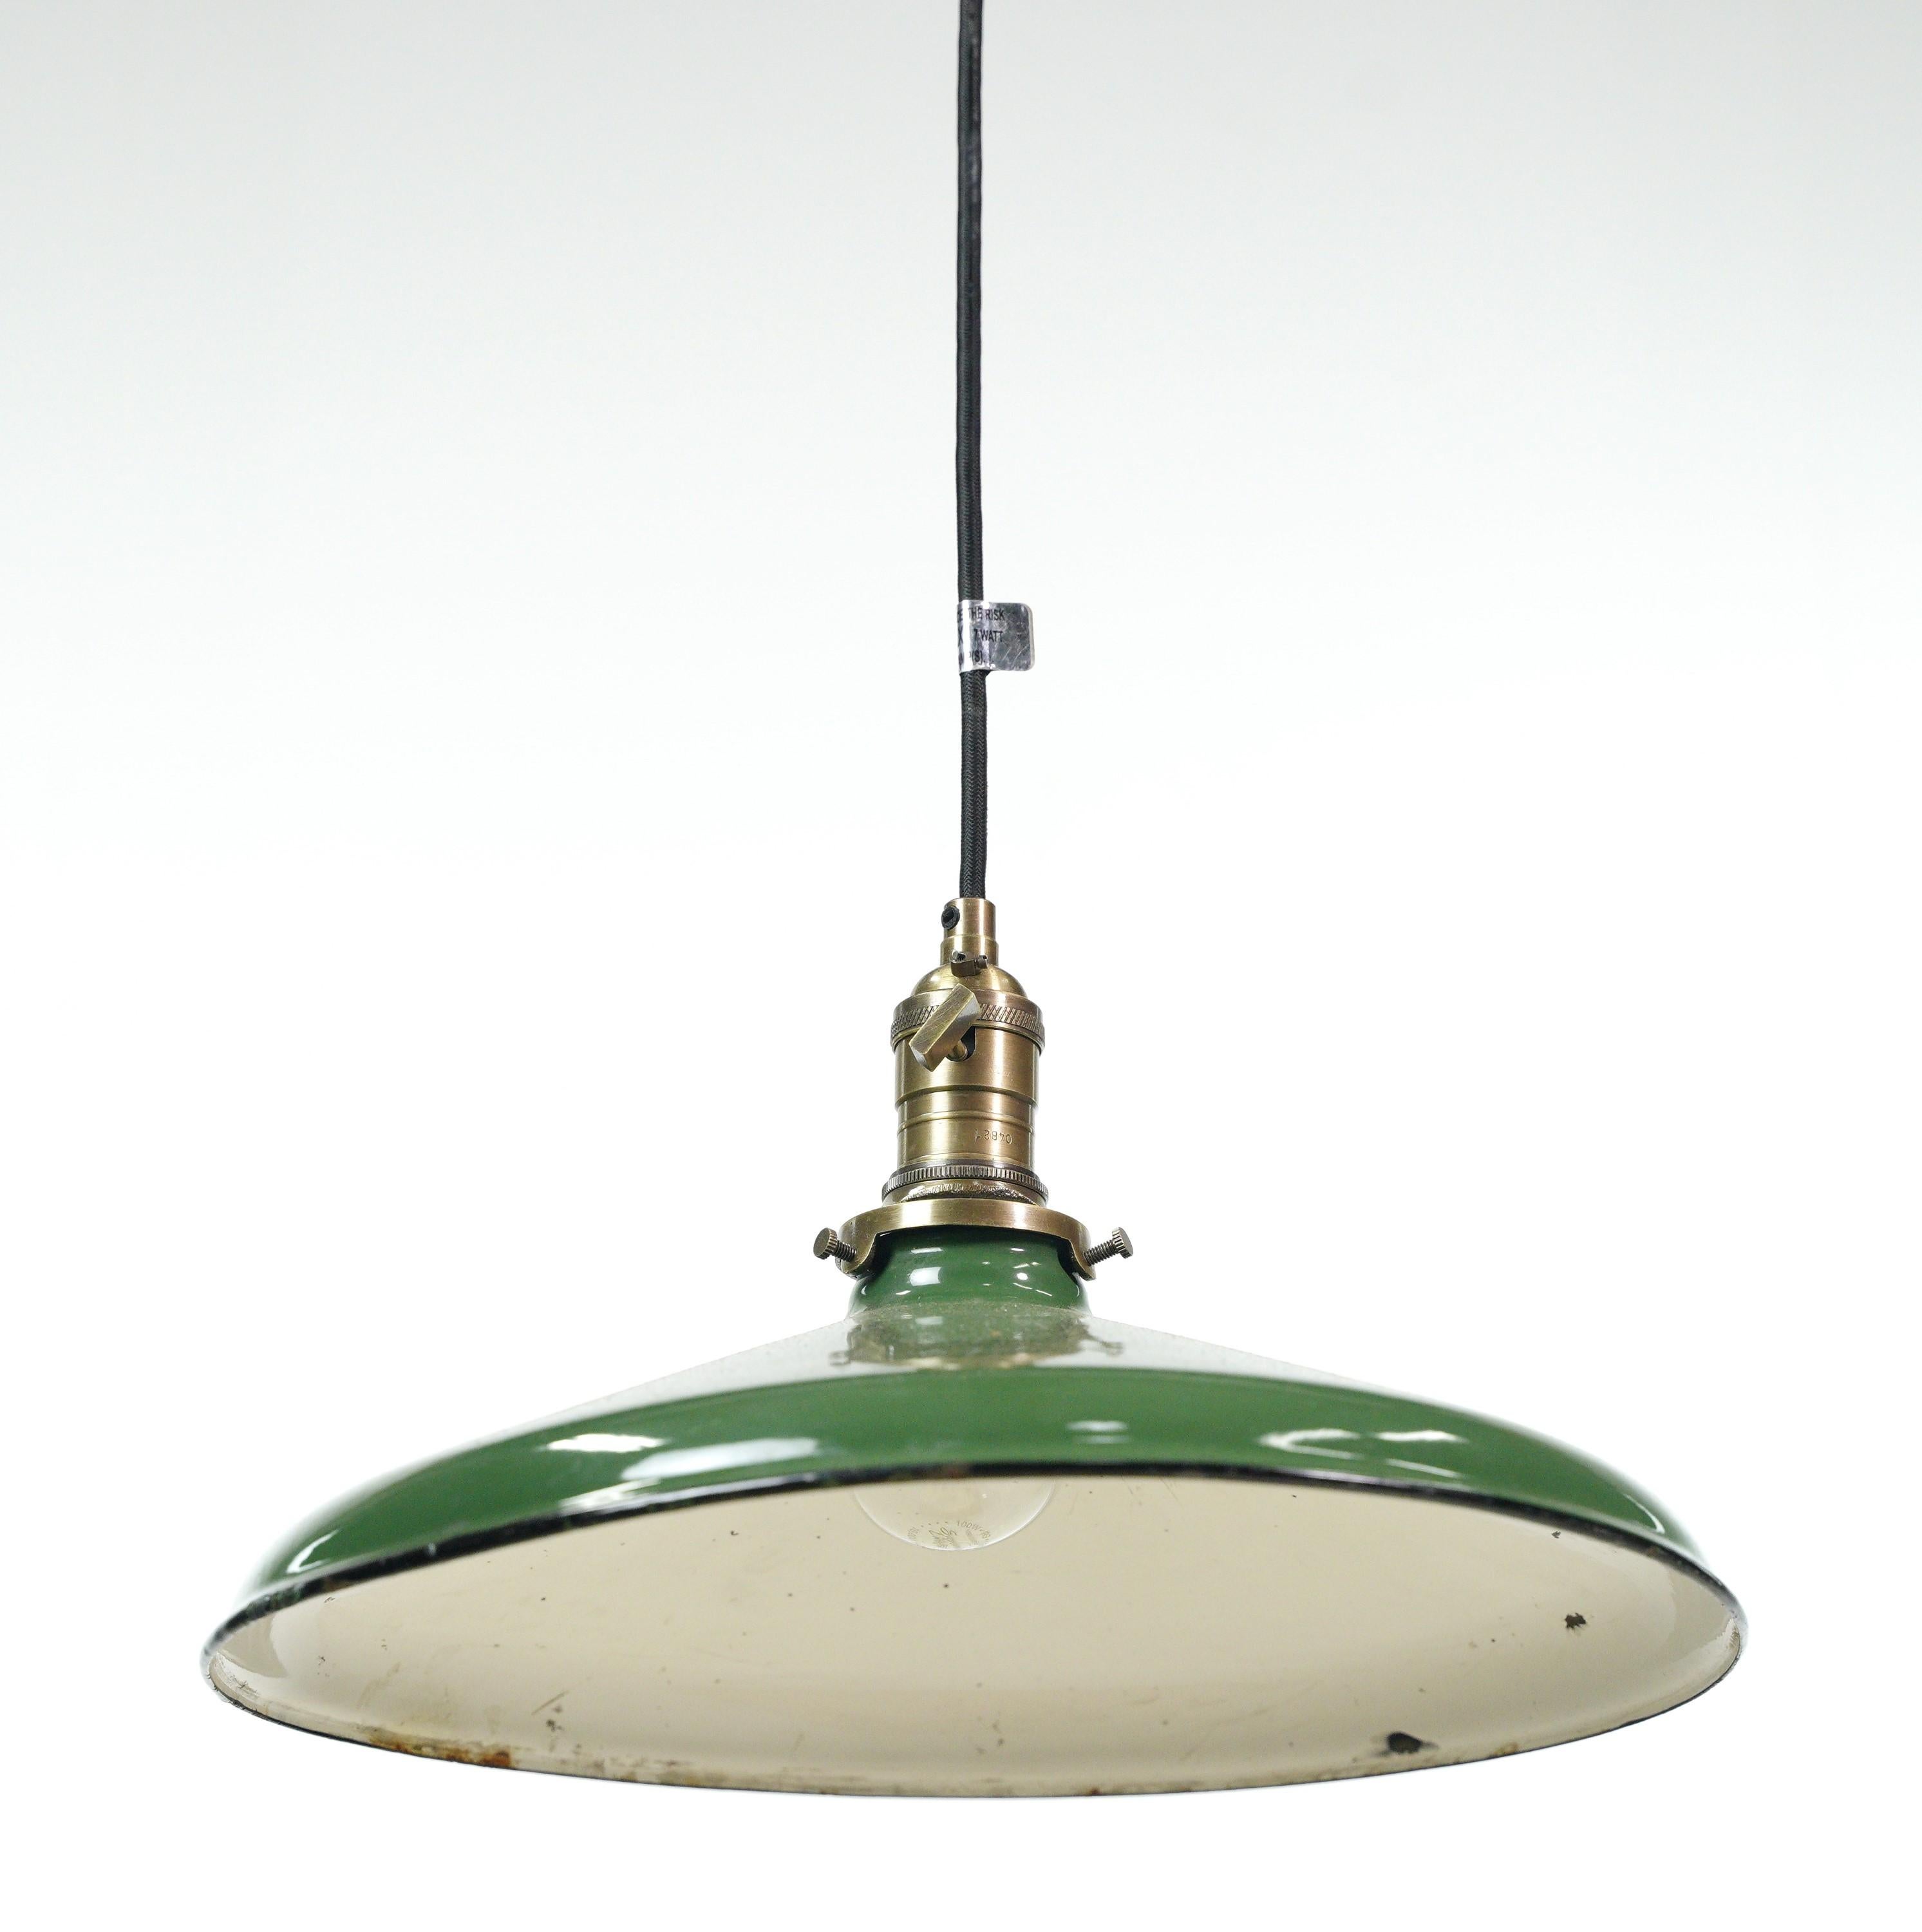 Industrial pendant light featuring a vintage green enameled steel shade with a newly made black cord and antique brass finished fitter. This unique blend of materials and finishes creates a bold statement piece that combines vintage charm with